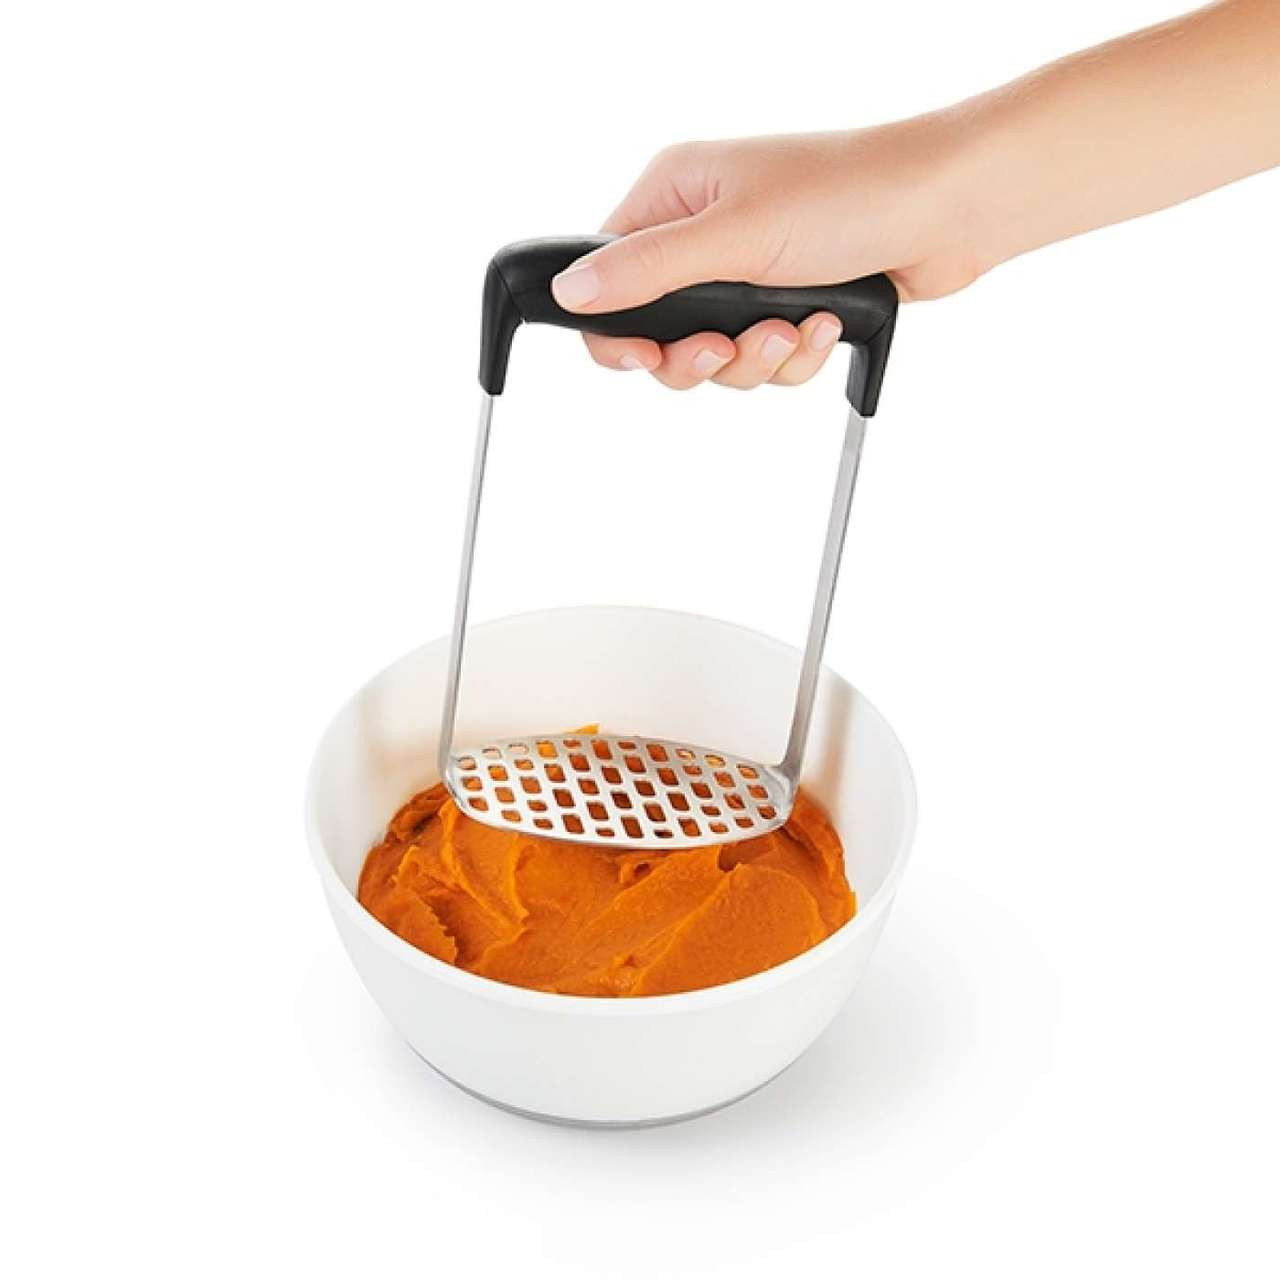 https://cdn11.bigcommerce.com/s-hccytny0od/images/stencil/1280x1280/products/2042/6696/oxo-good-grips-smooth-potato-masher-1__61313.1585607486.jpg?c=2?imbypass=on